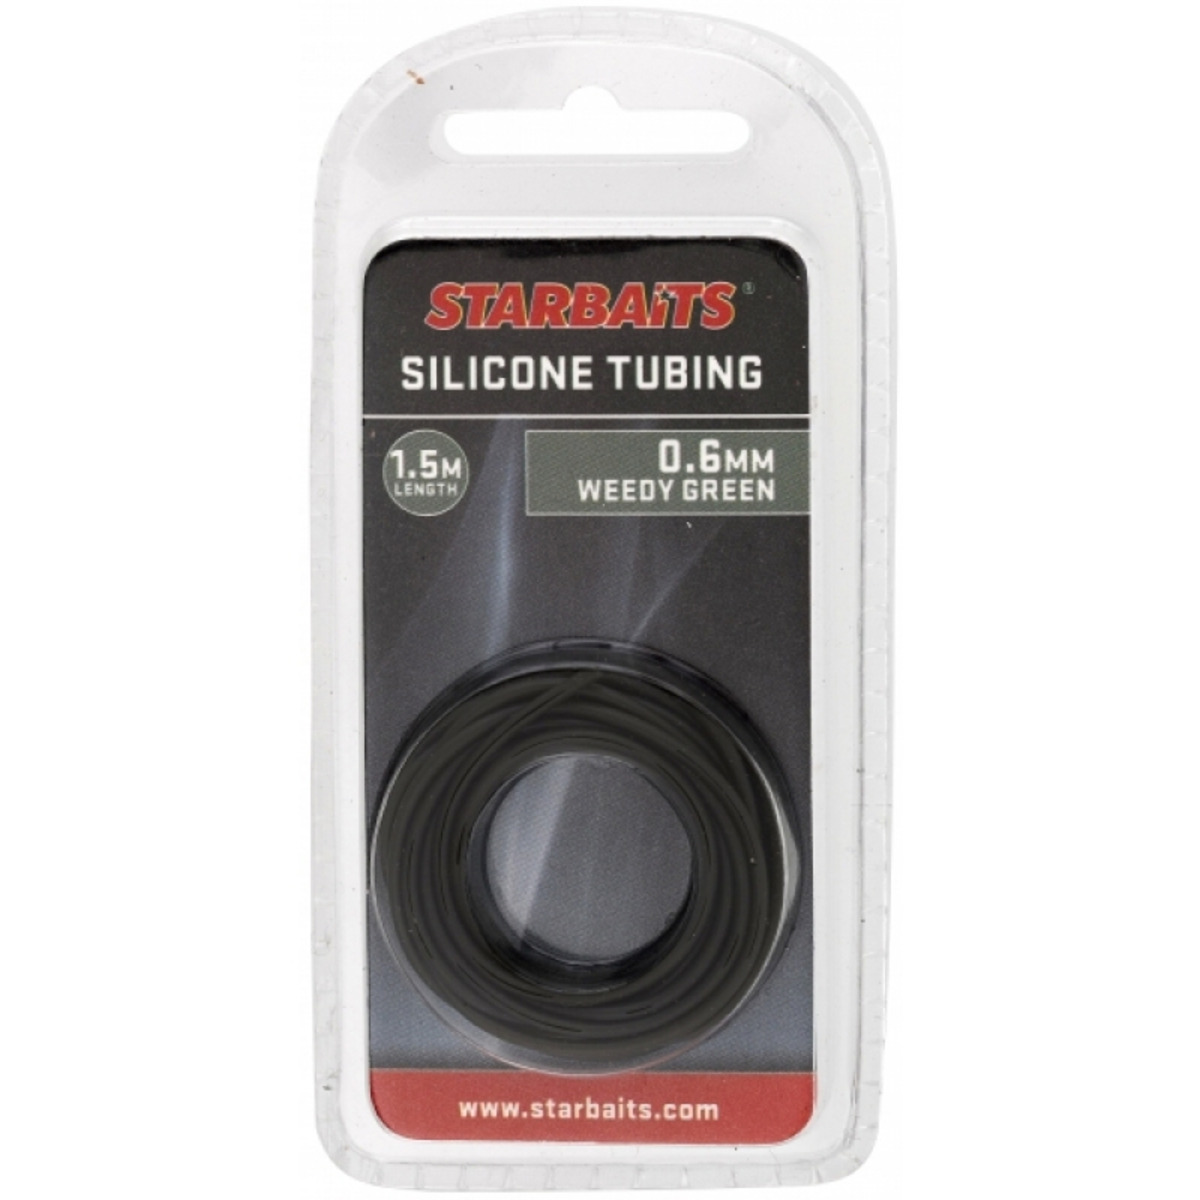 Starbaits Tubing 0.6mm Silicone - WEEDY GREEN